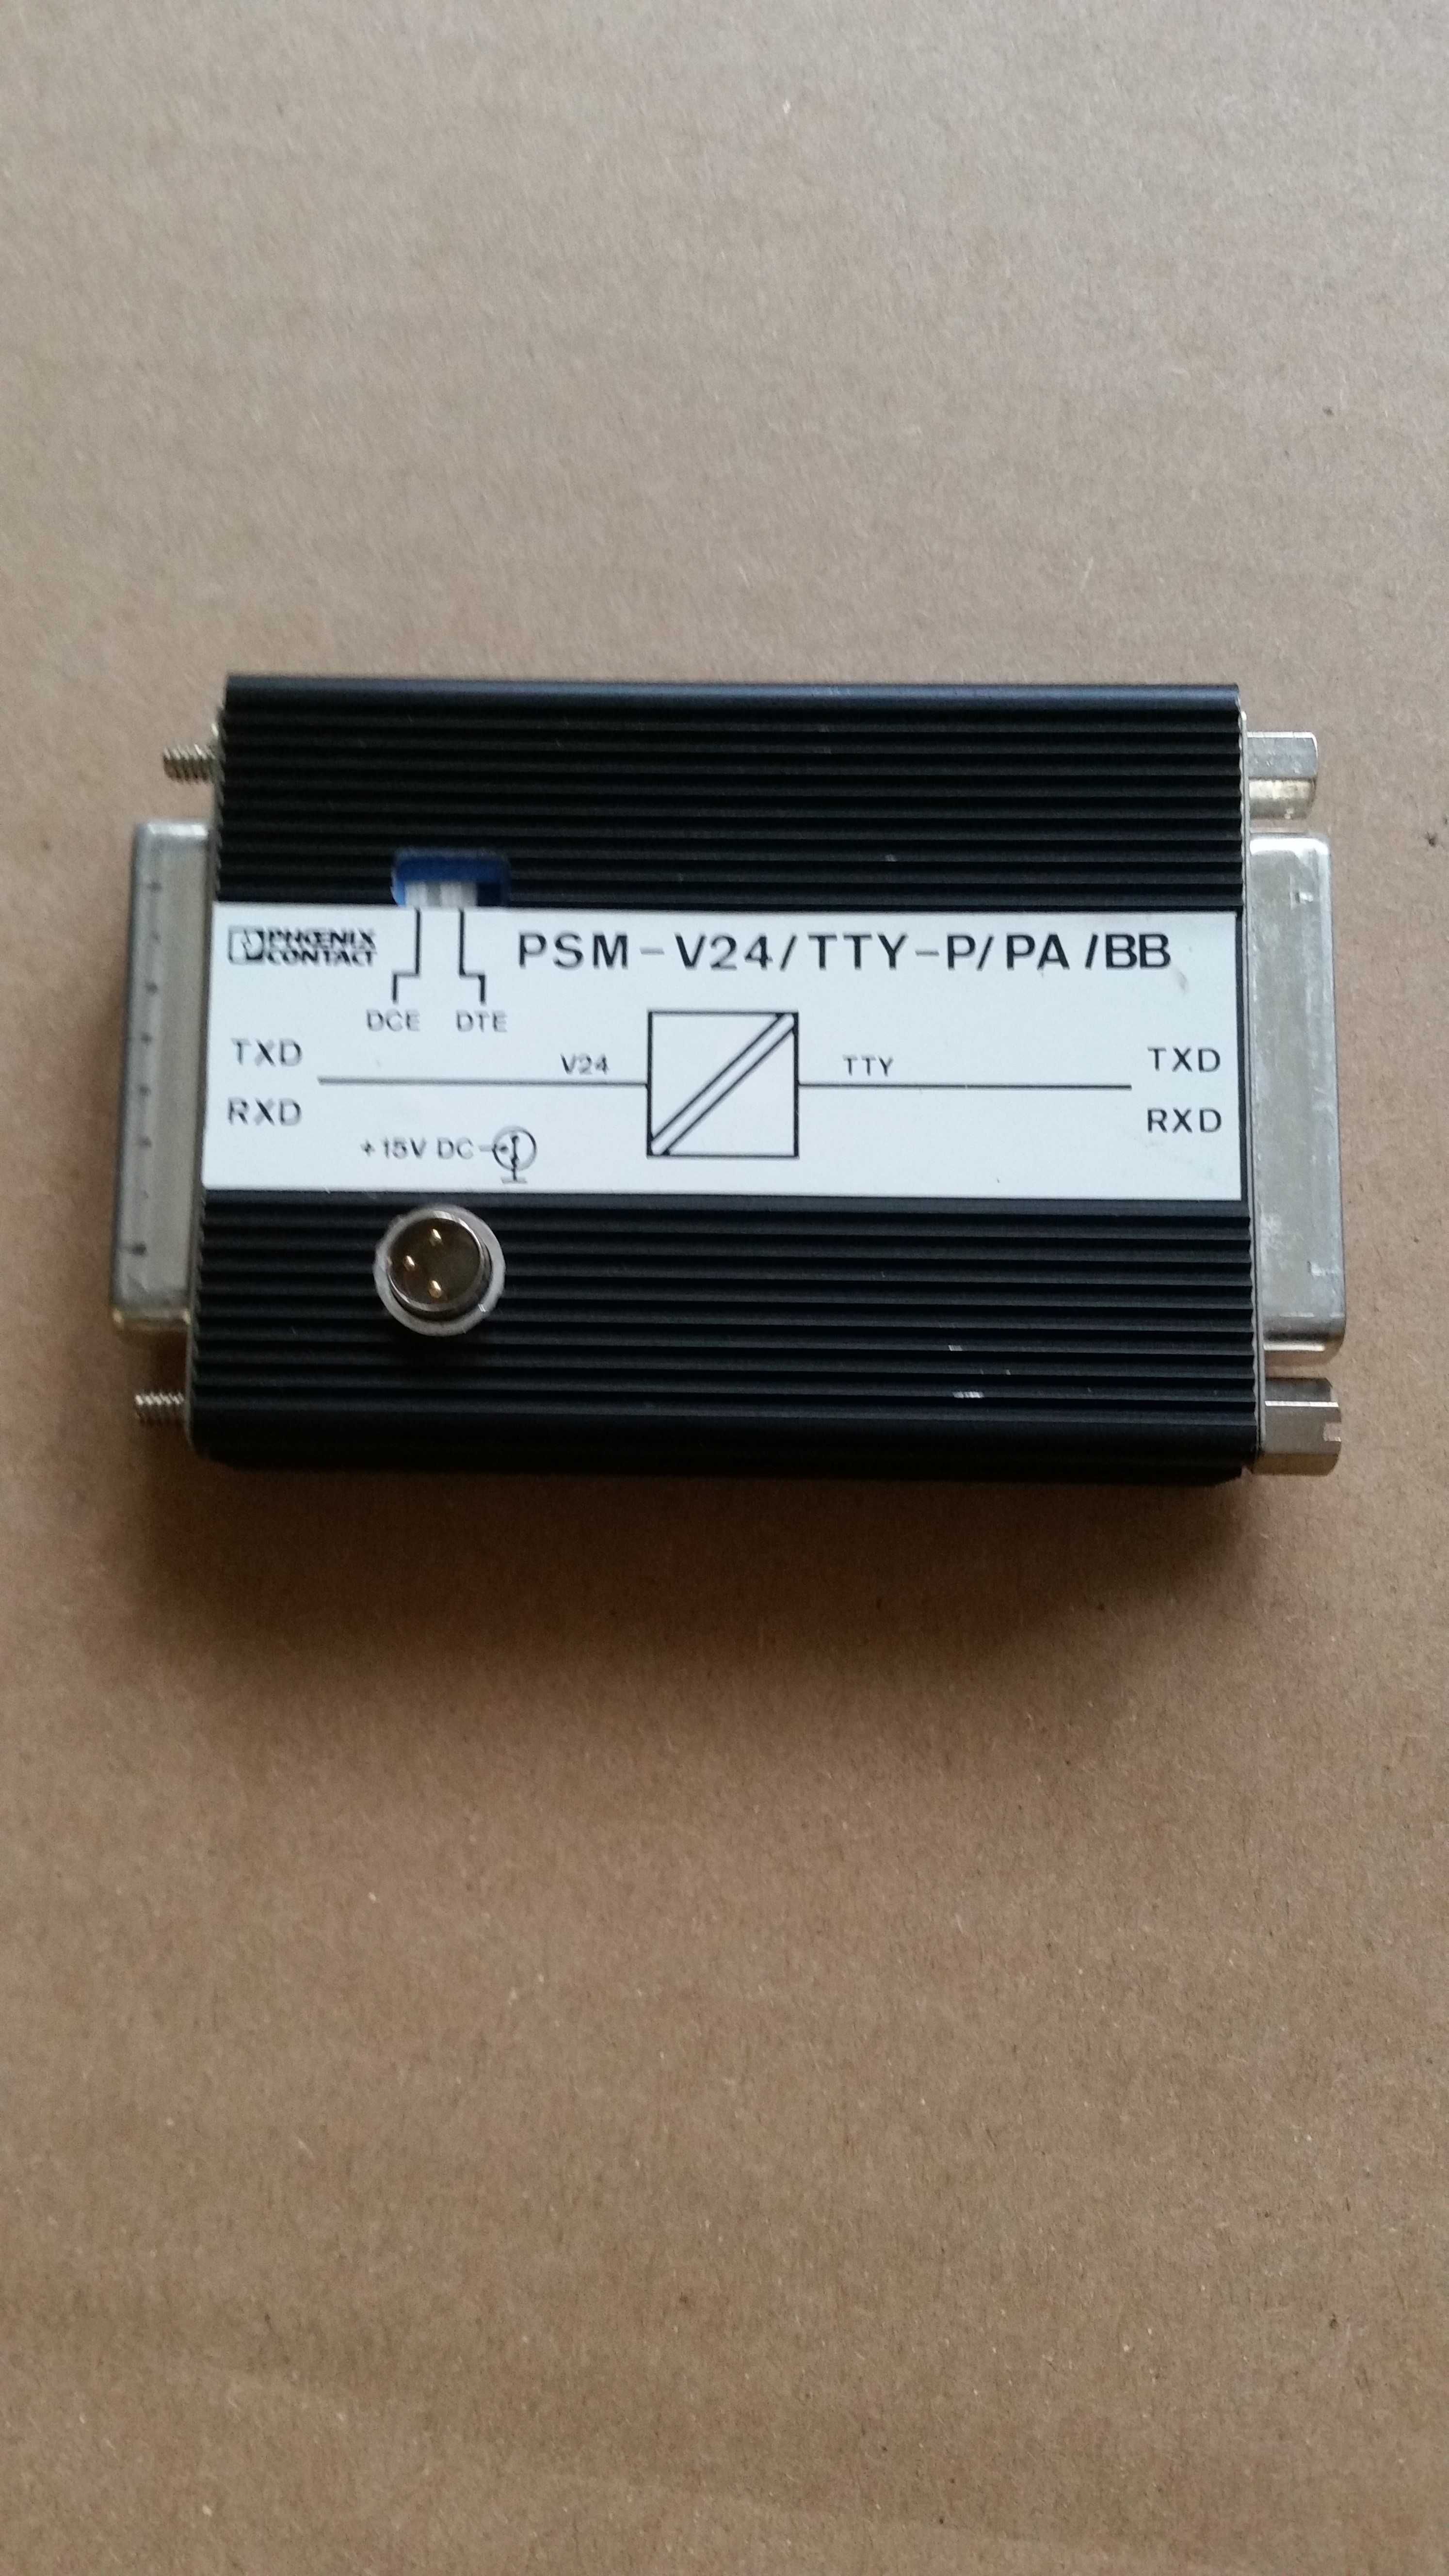 PhoenixContact PSM-V24/TTY-P/PA/BB TTY RS232